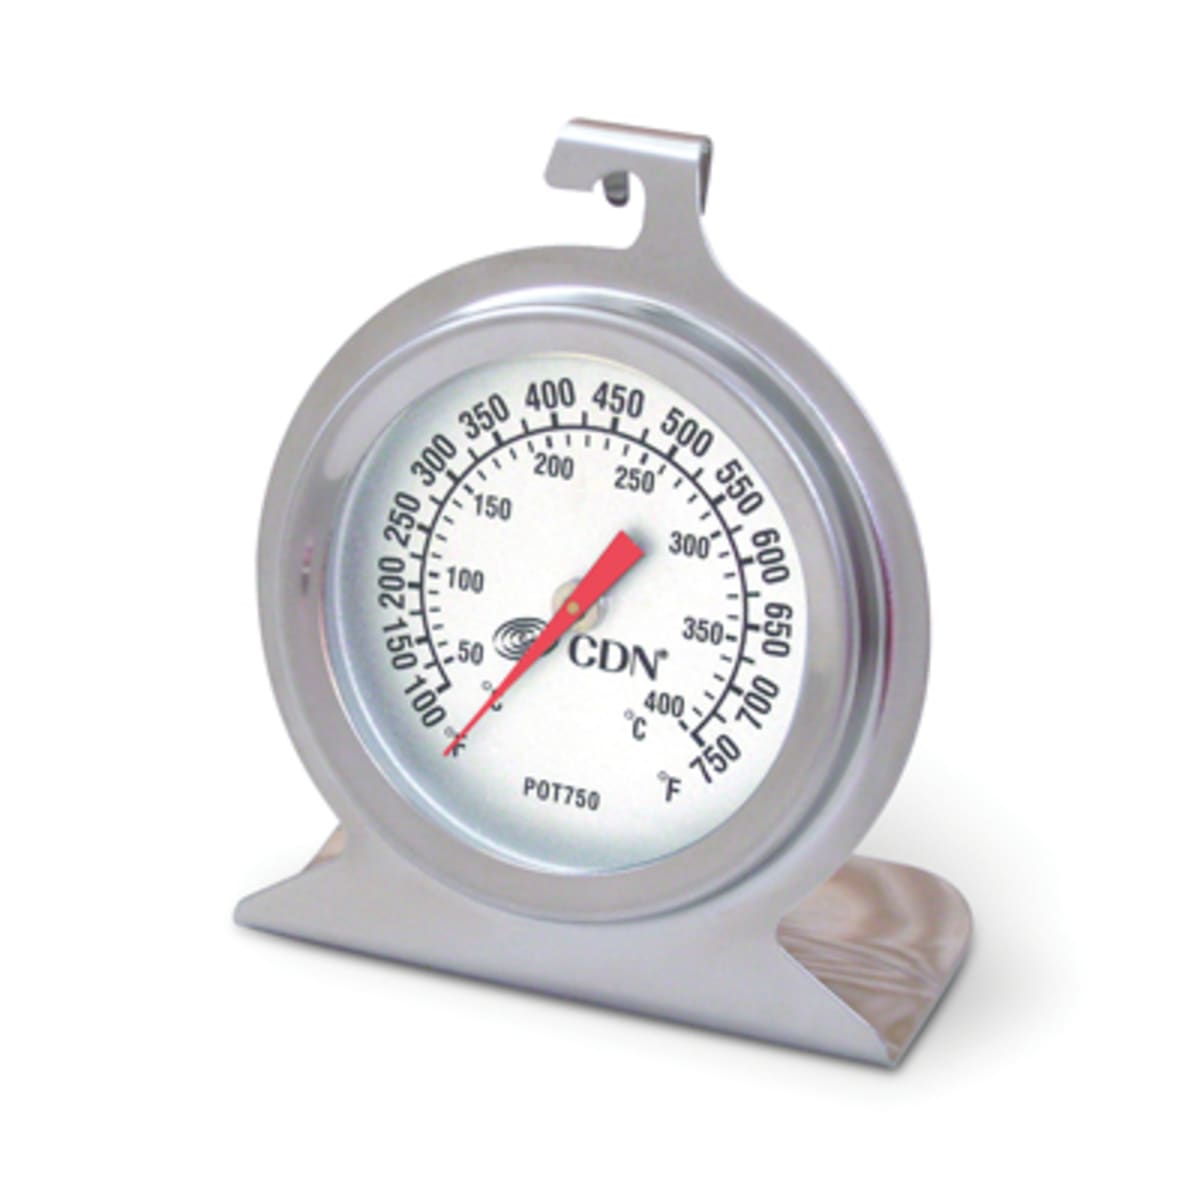 Pot & Thermometer